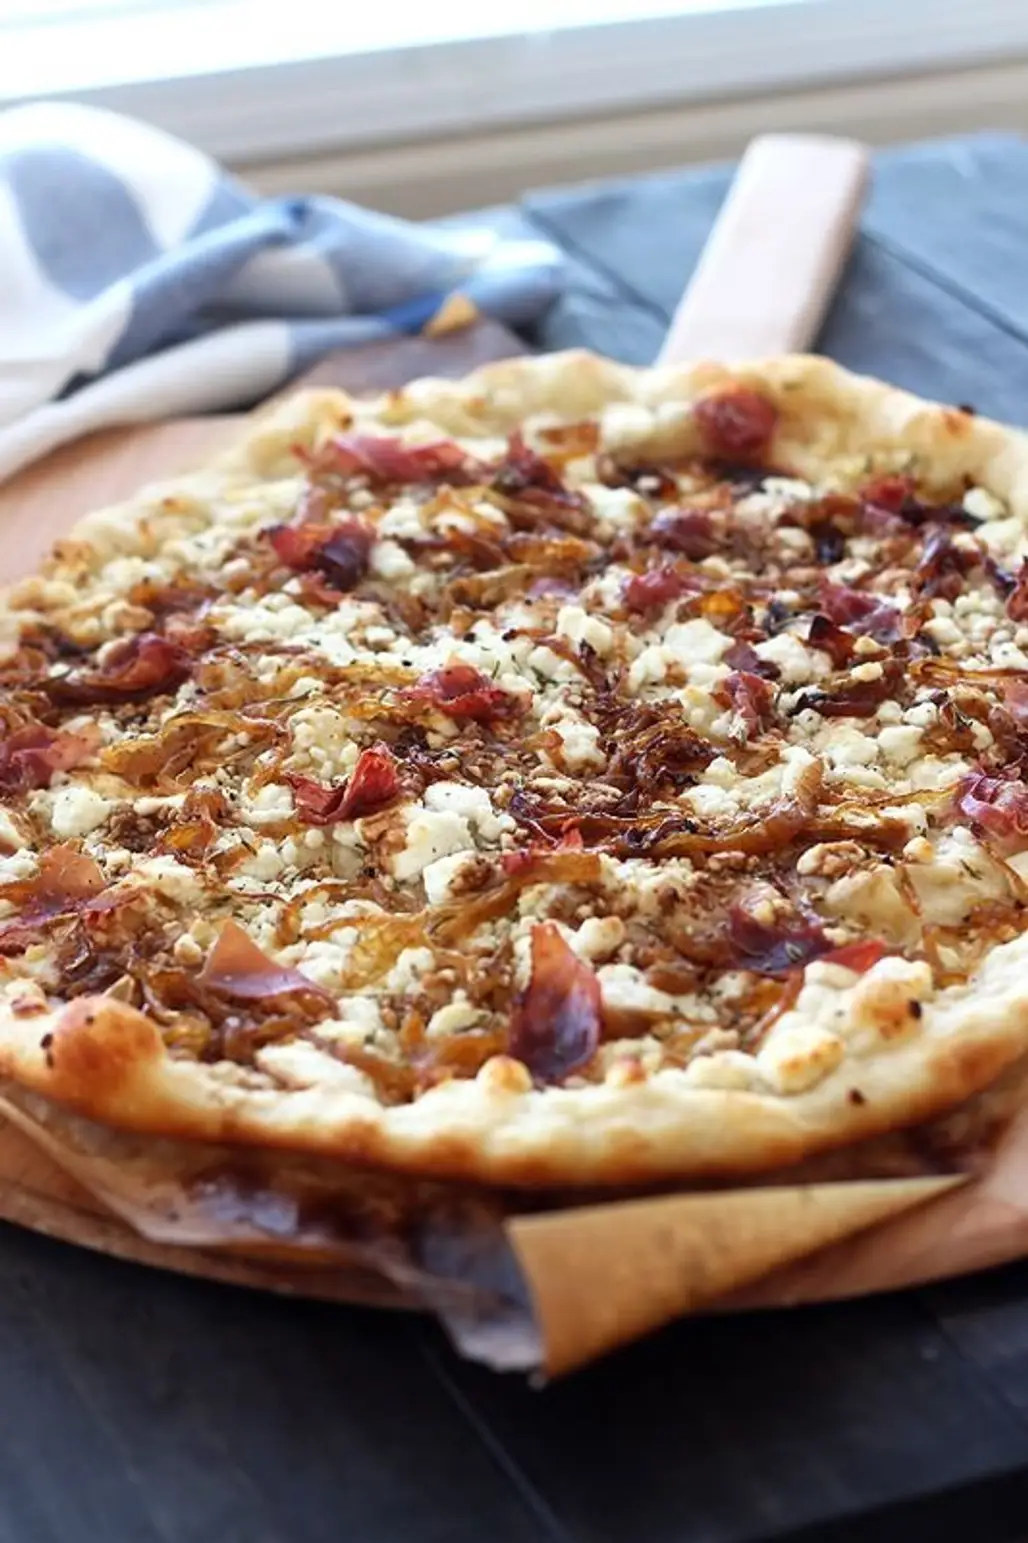 Caramelized Onion, Goat Cheese, and Prosciutto Pizza